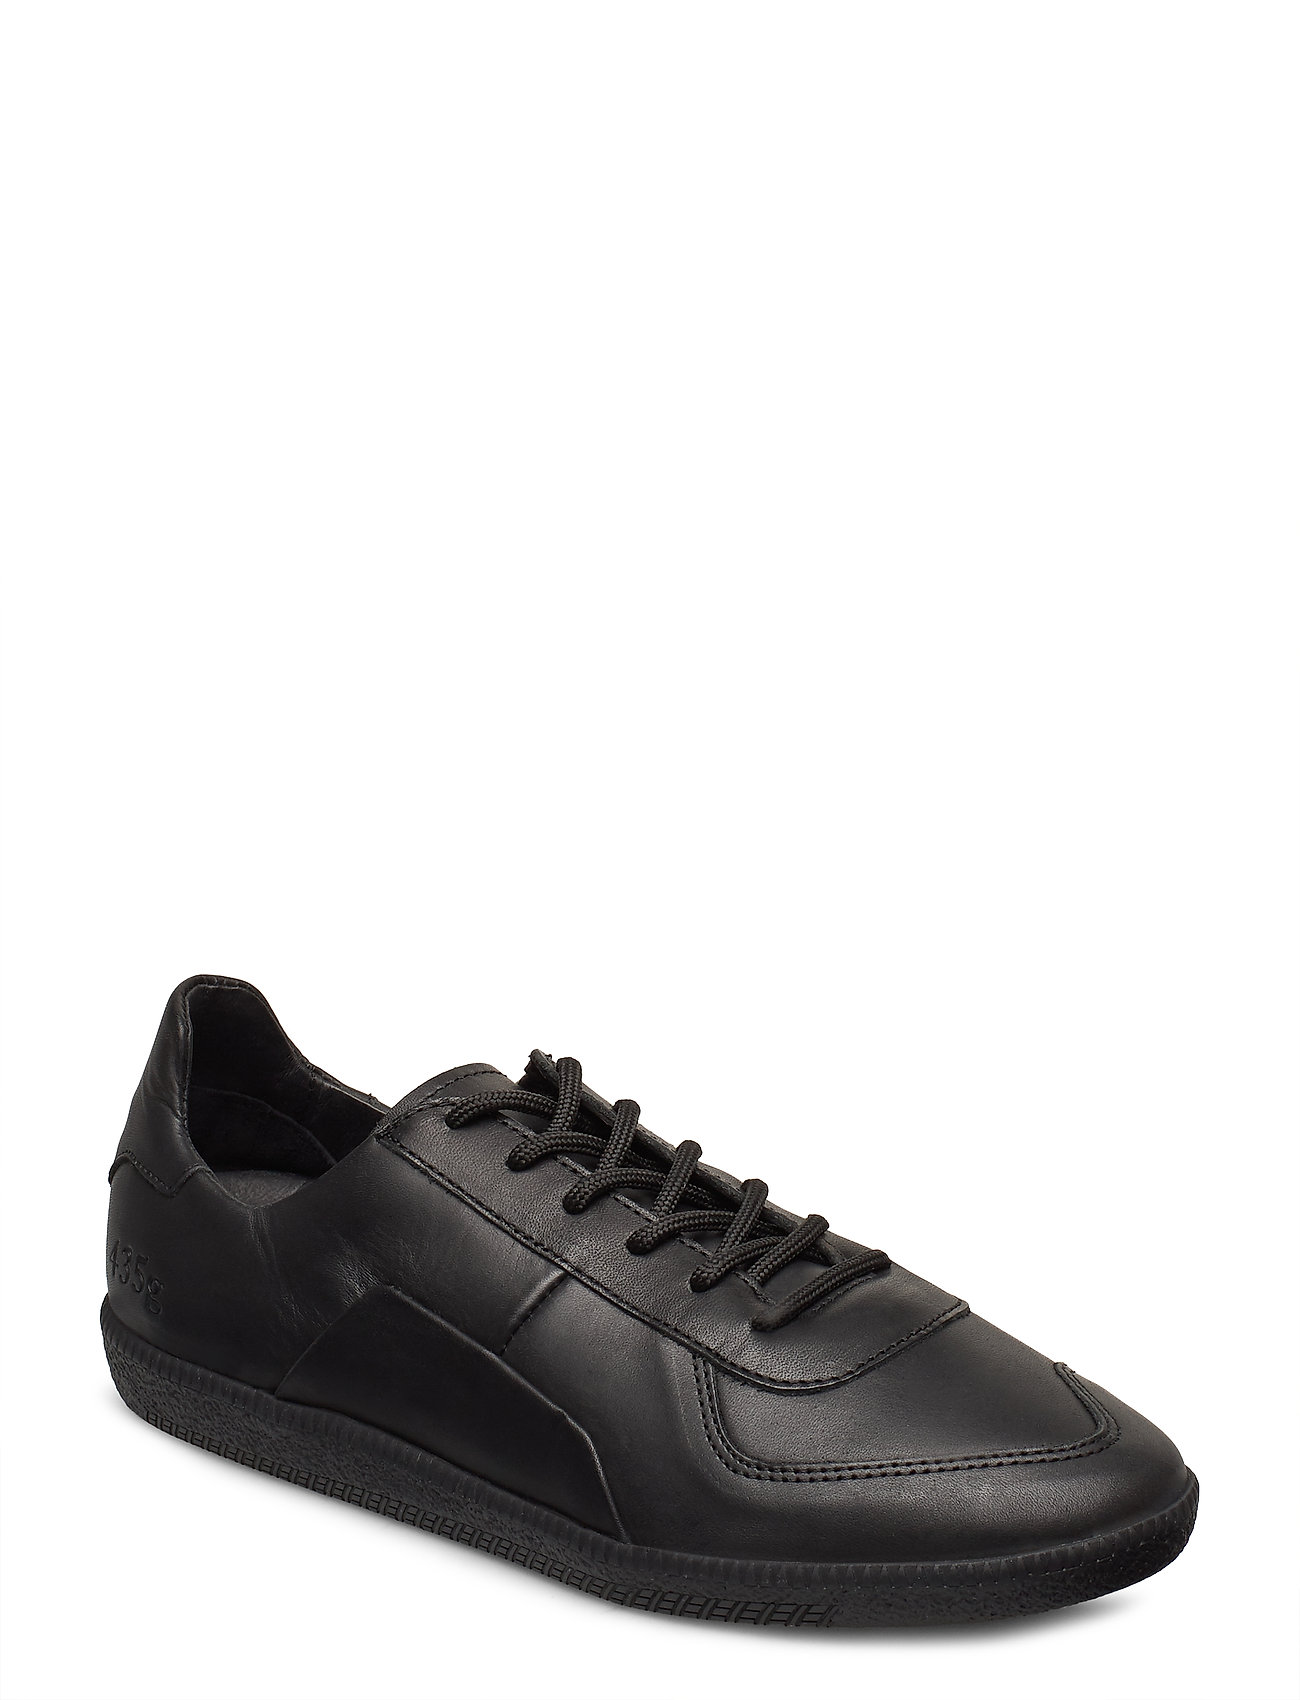 435g Black Leather - Sneakers Booztlet.com